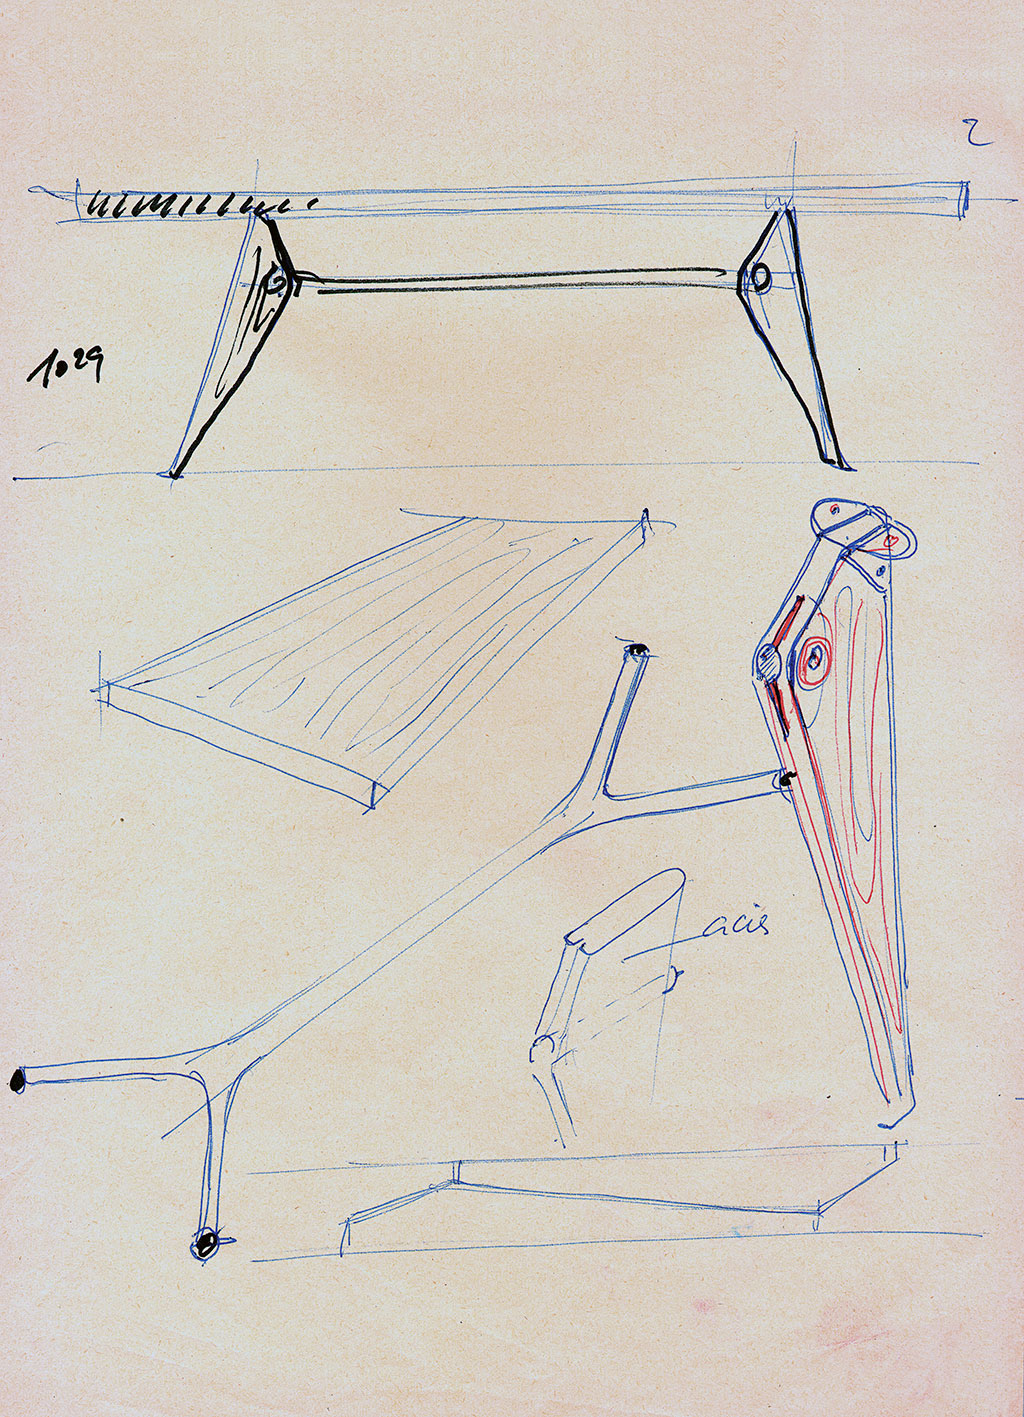 S.A.M. table. Principle of fixation of the crossmember to the legs with round metal disks. Sketch by Jean Prouvé for his classes at CNAM, Paris, 1957–1971.